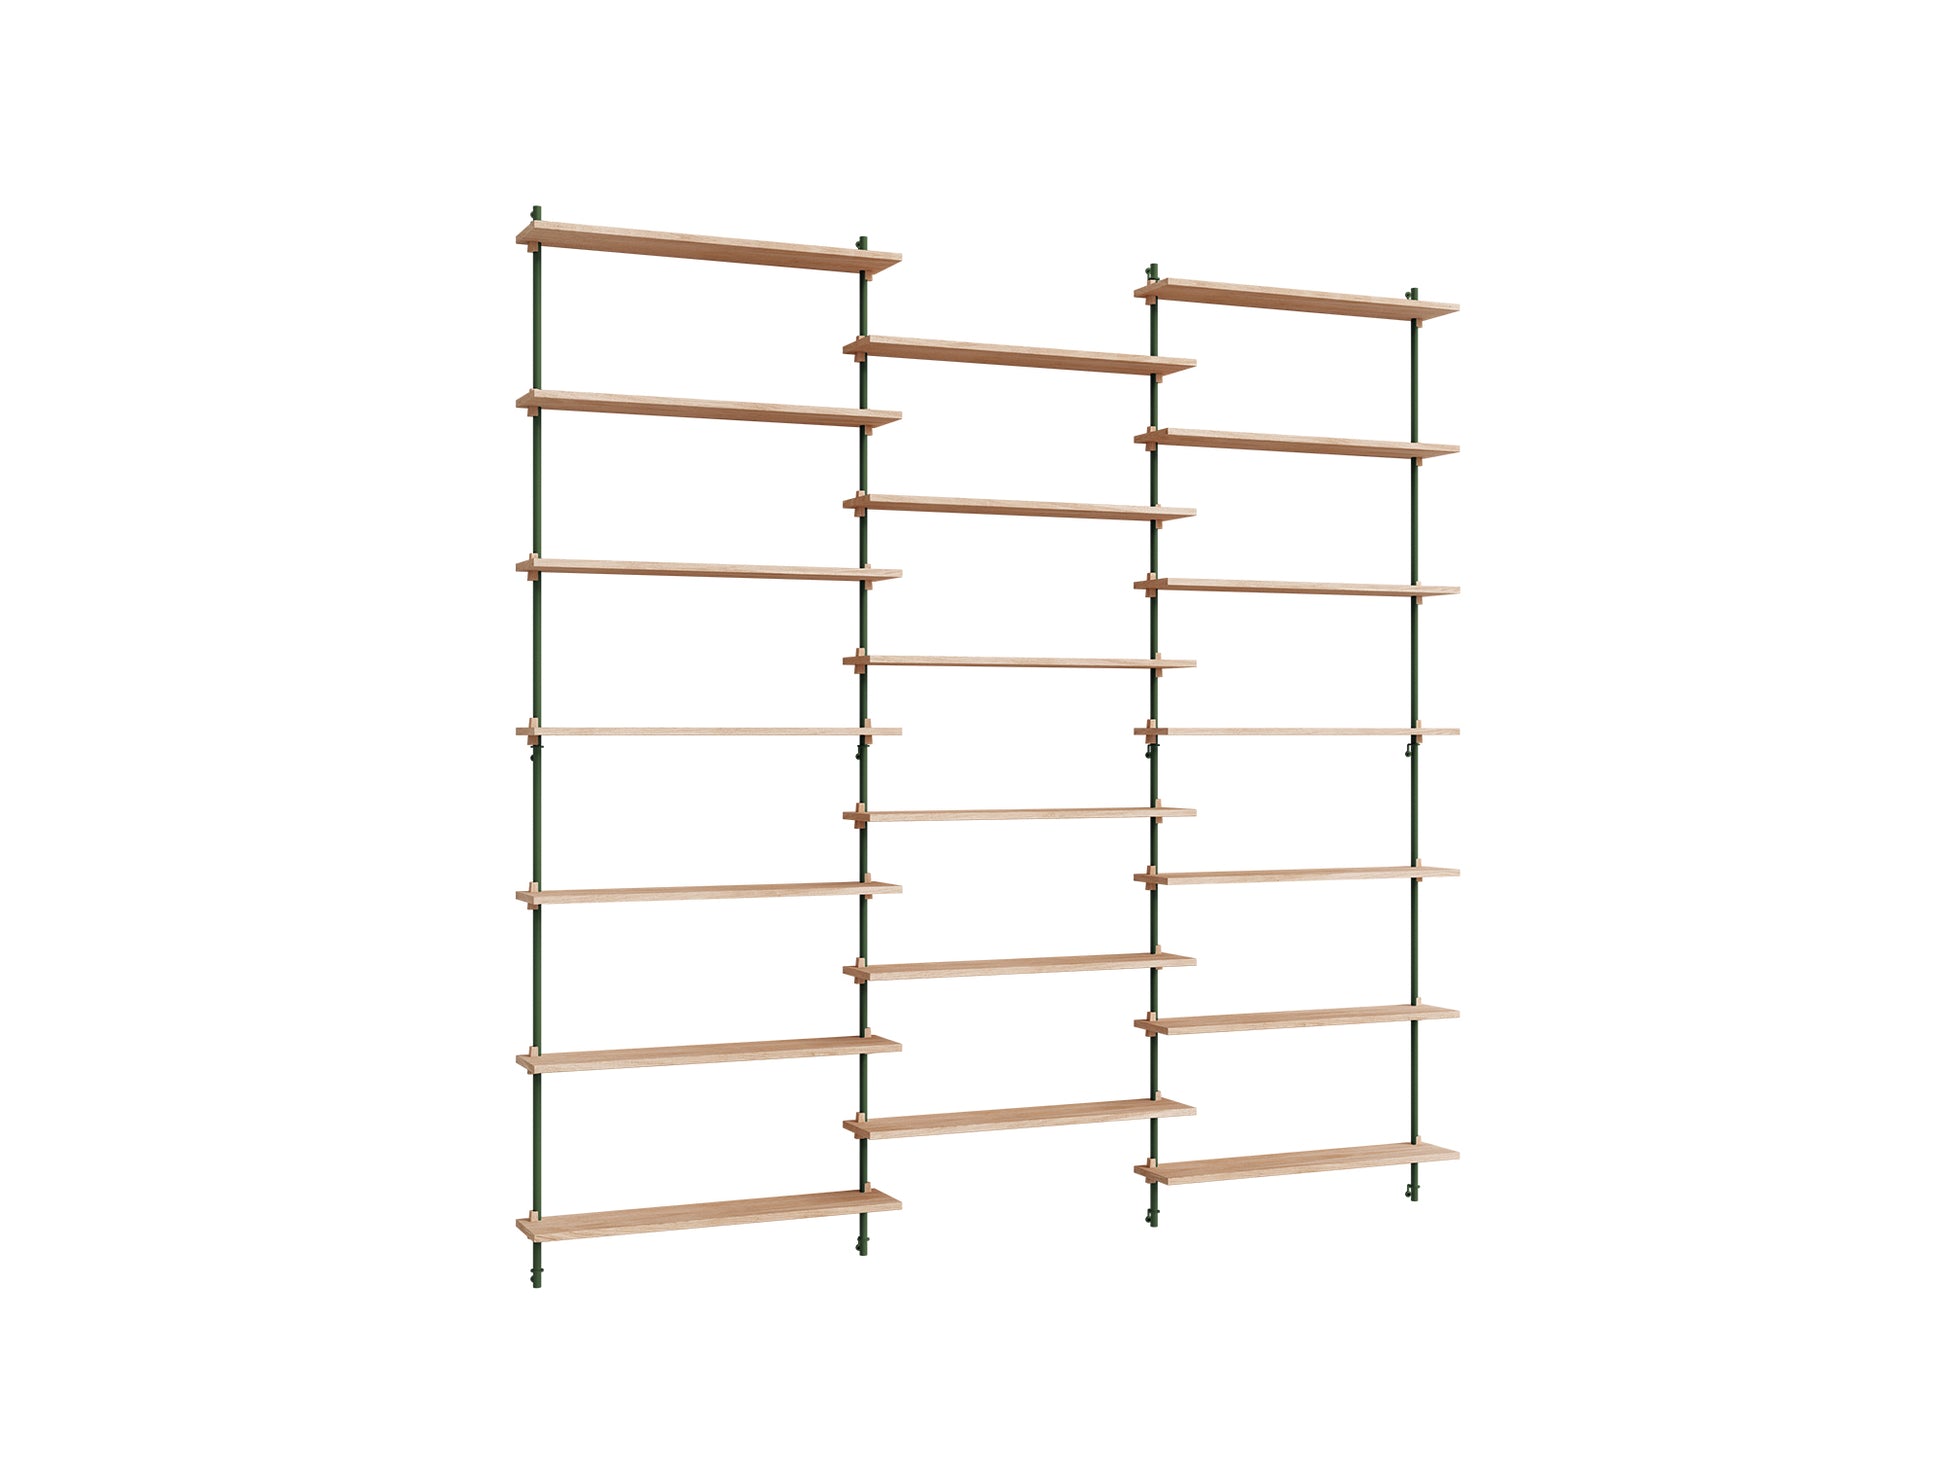 Wall Shelving System Sets (230 cm) by Moebe - WS.230.3 / Pine Green Uprights / Oiled Oak